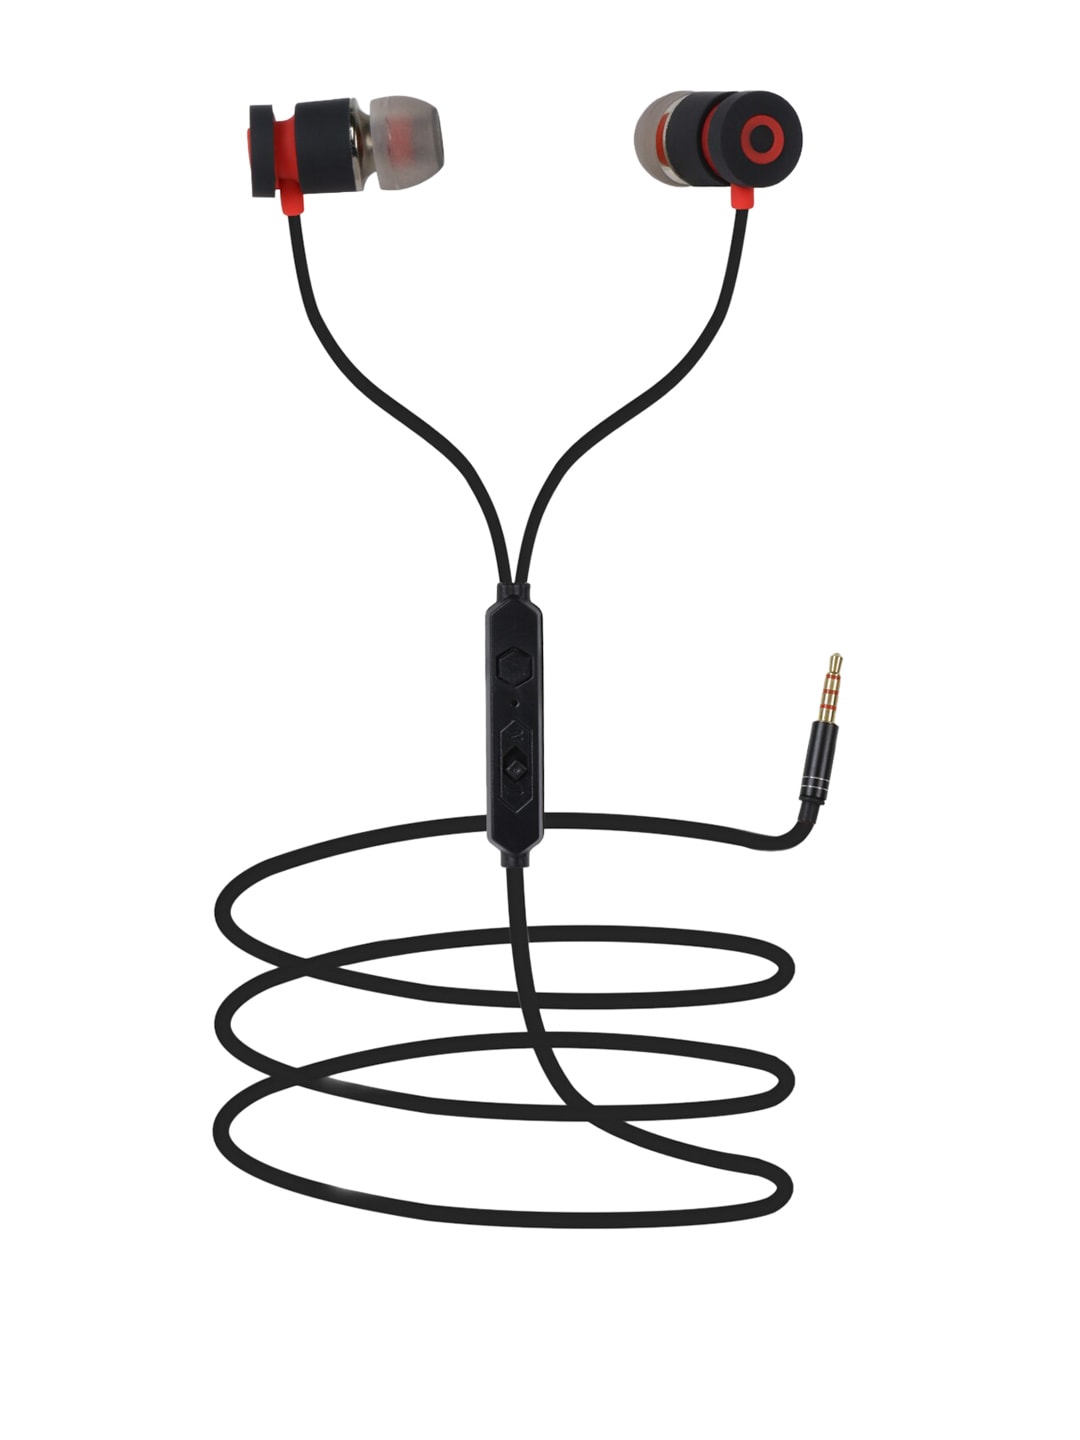 SwagMe Black & Red Solid Bassboss In-Ear Wired Earphones with Mic Price in India